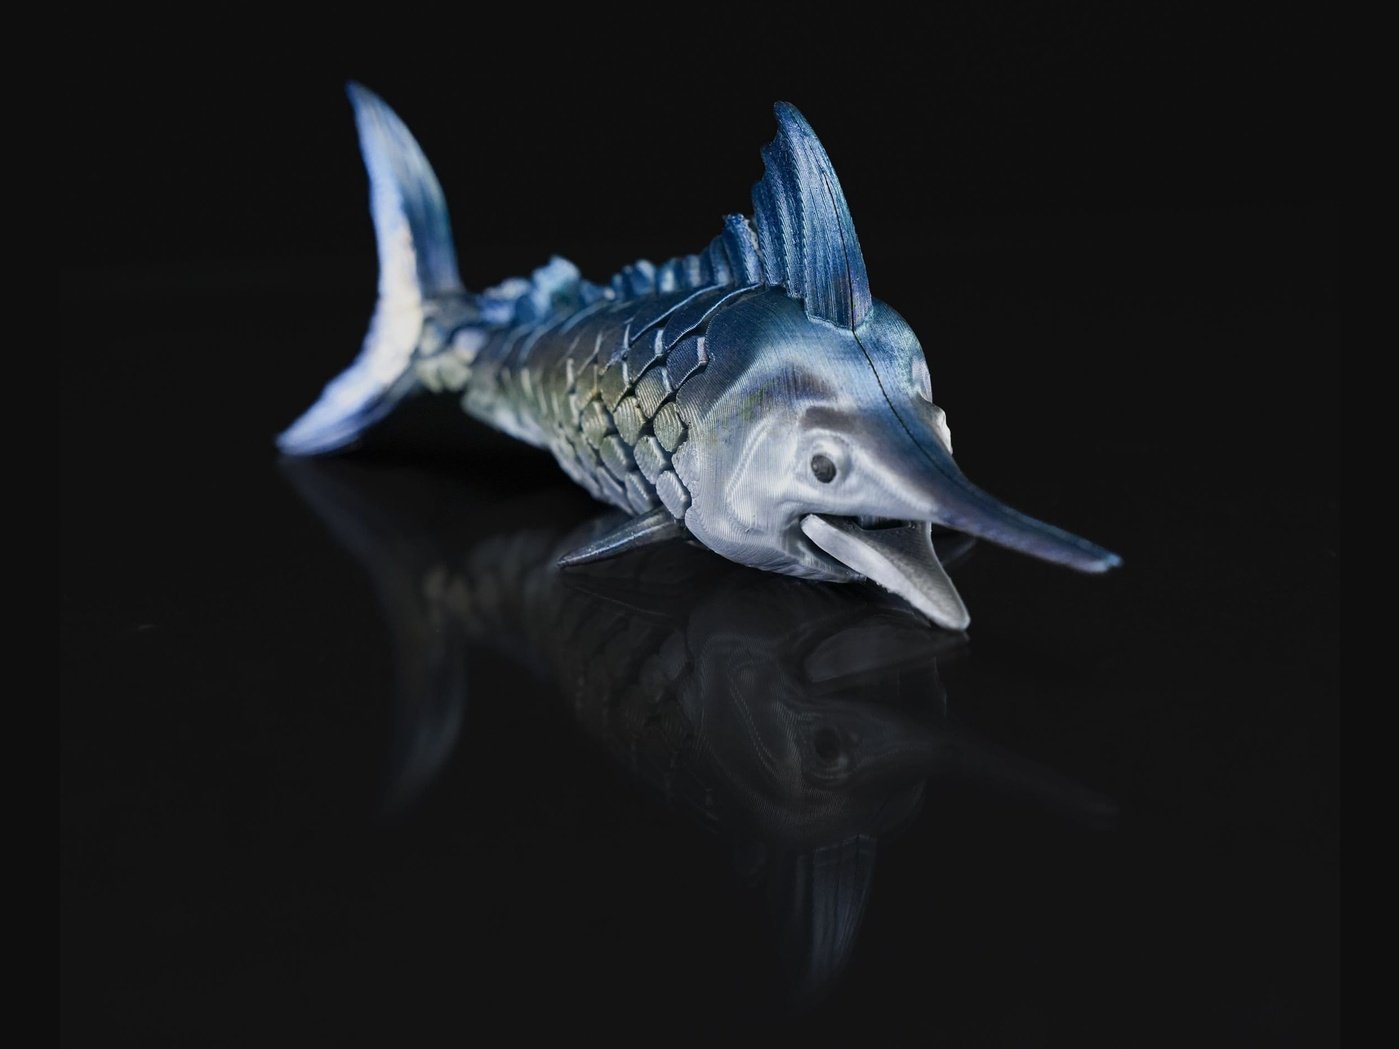 Articulating Marlin Fidget toy, sensory toy, 3d Printed fish desk toy